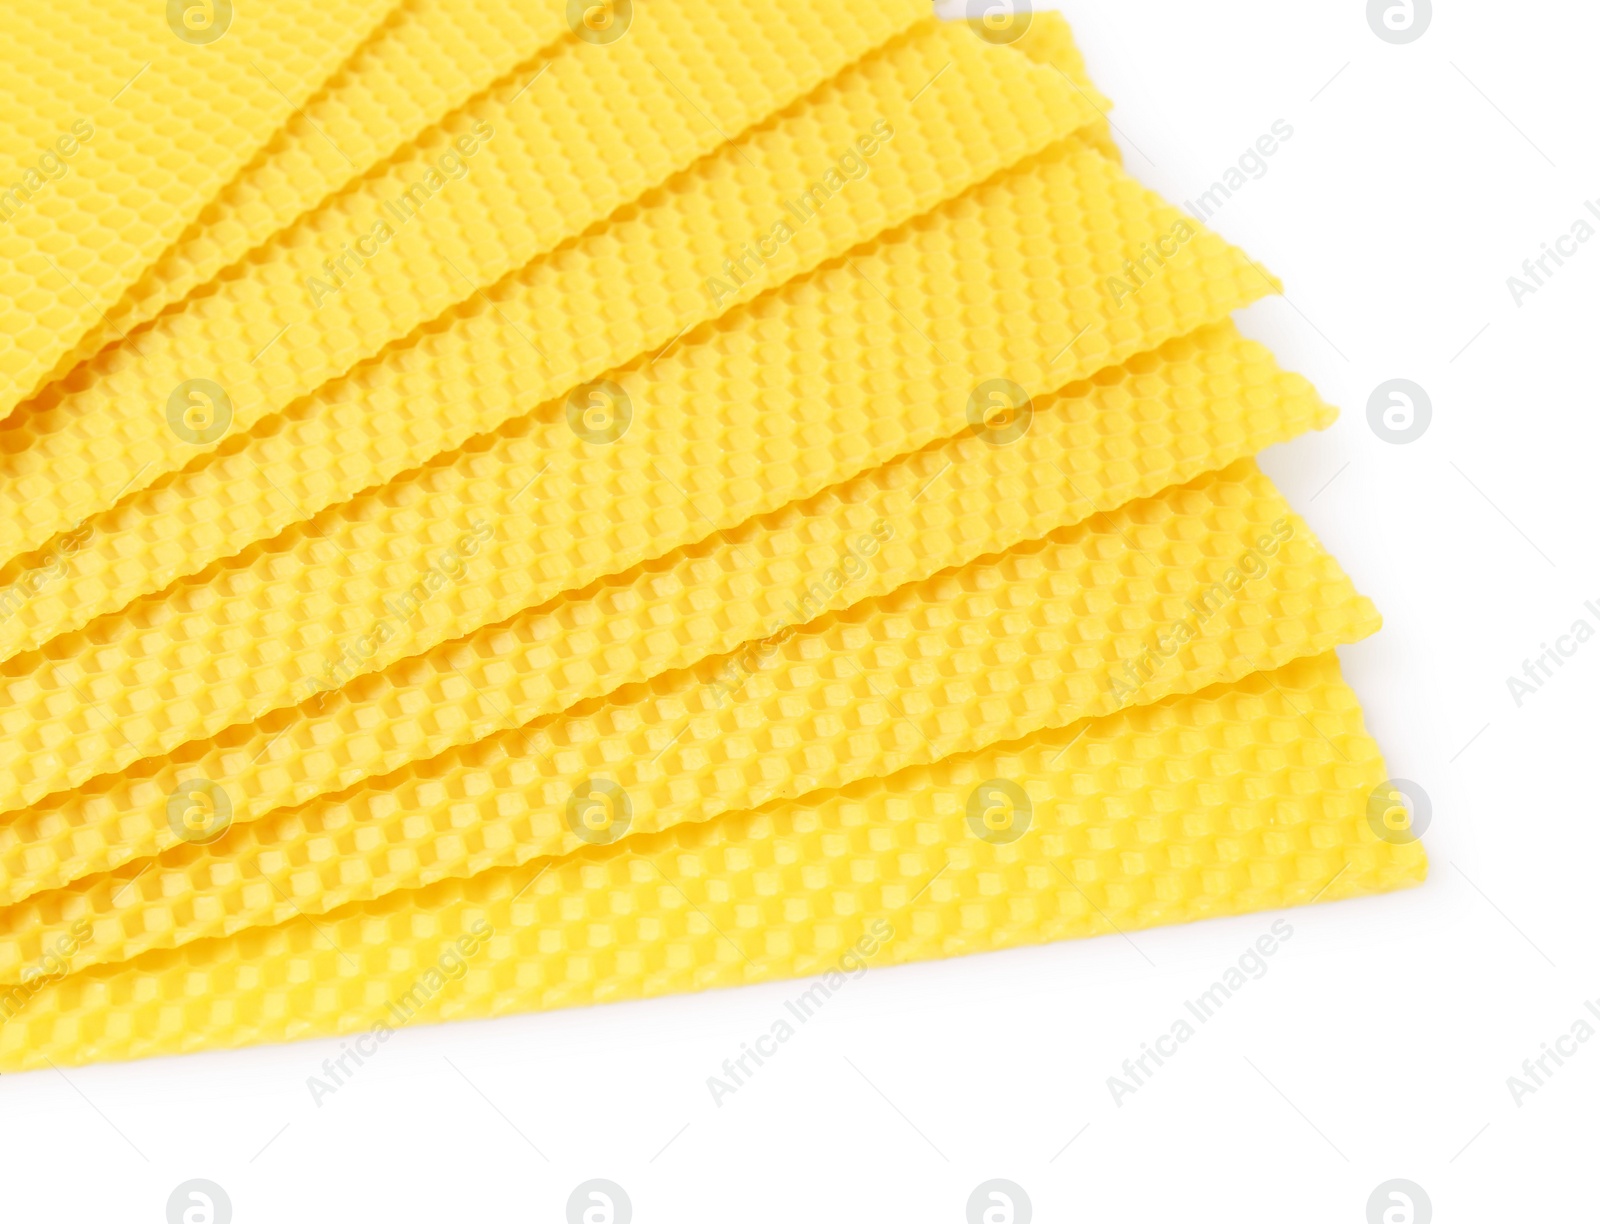 Photo of Natural organic beeswax sheets on white background